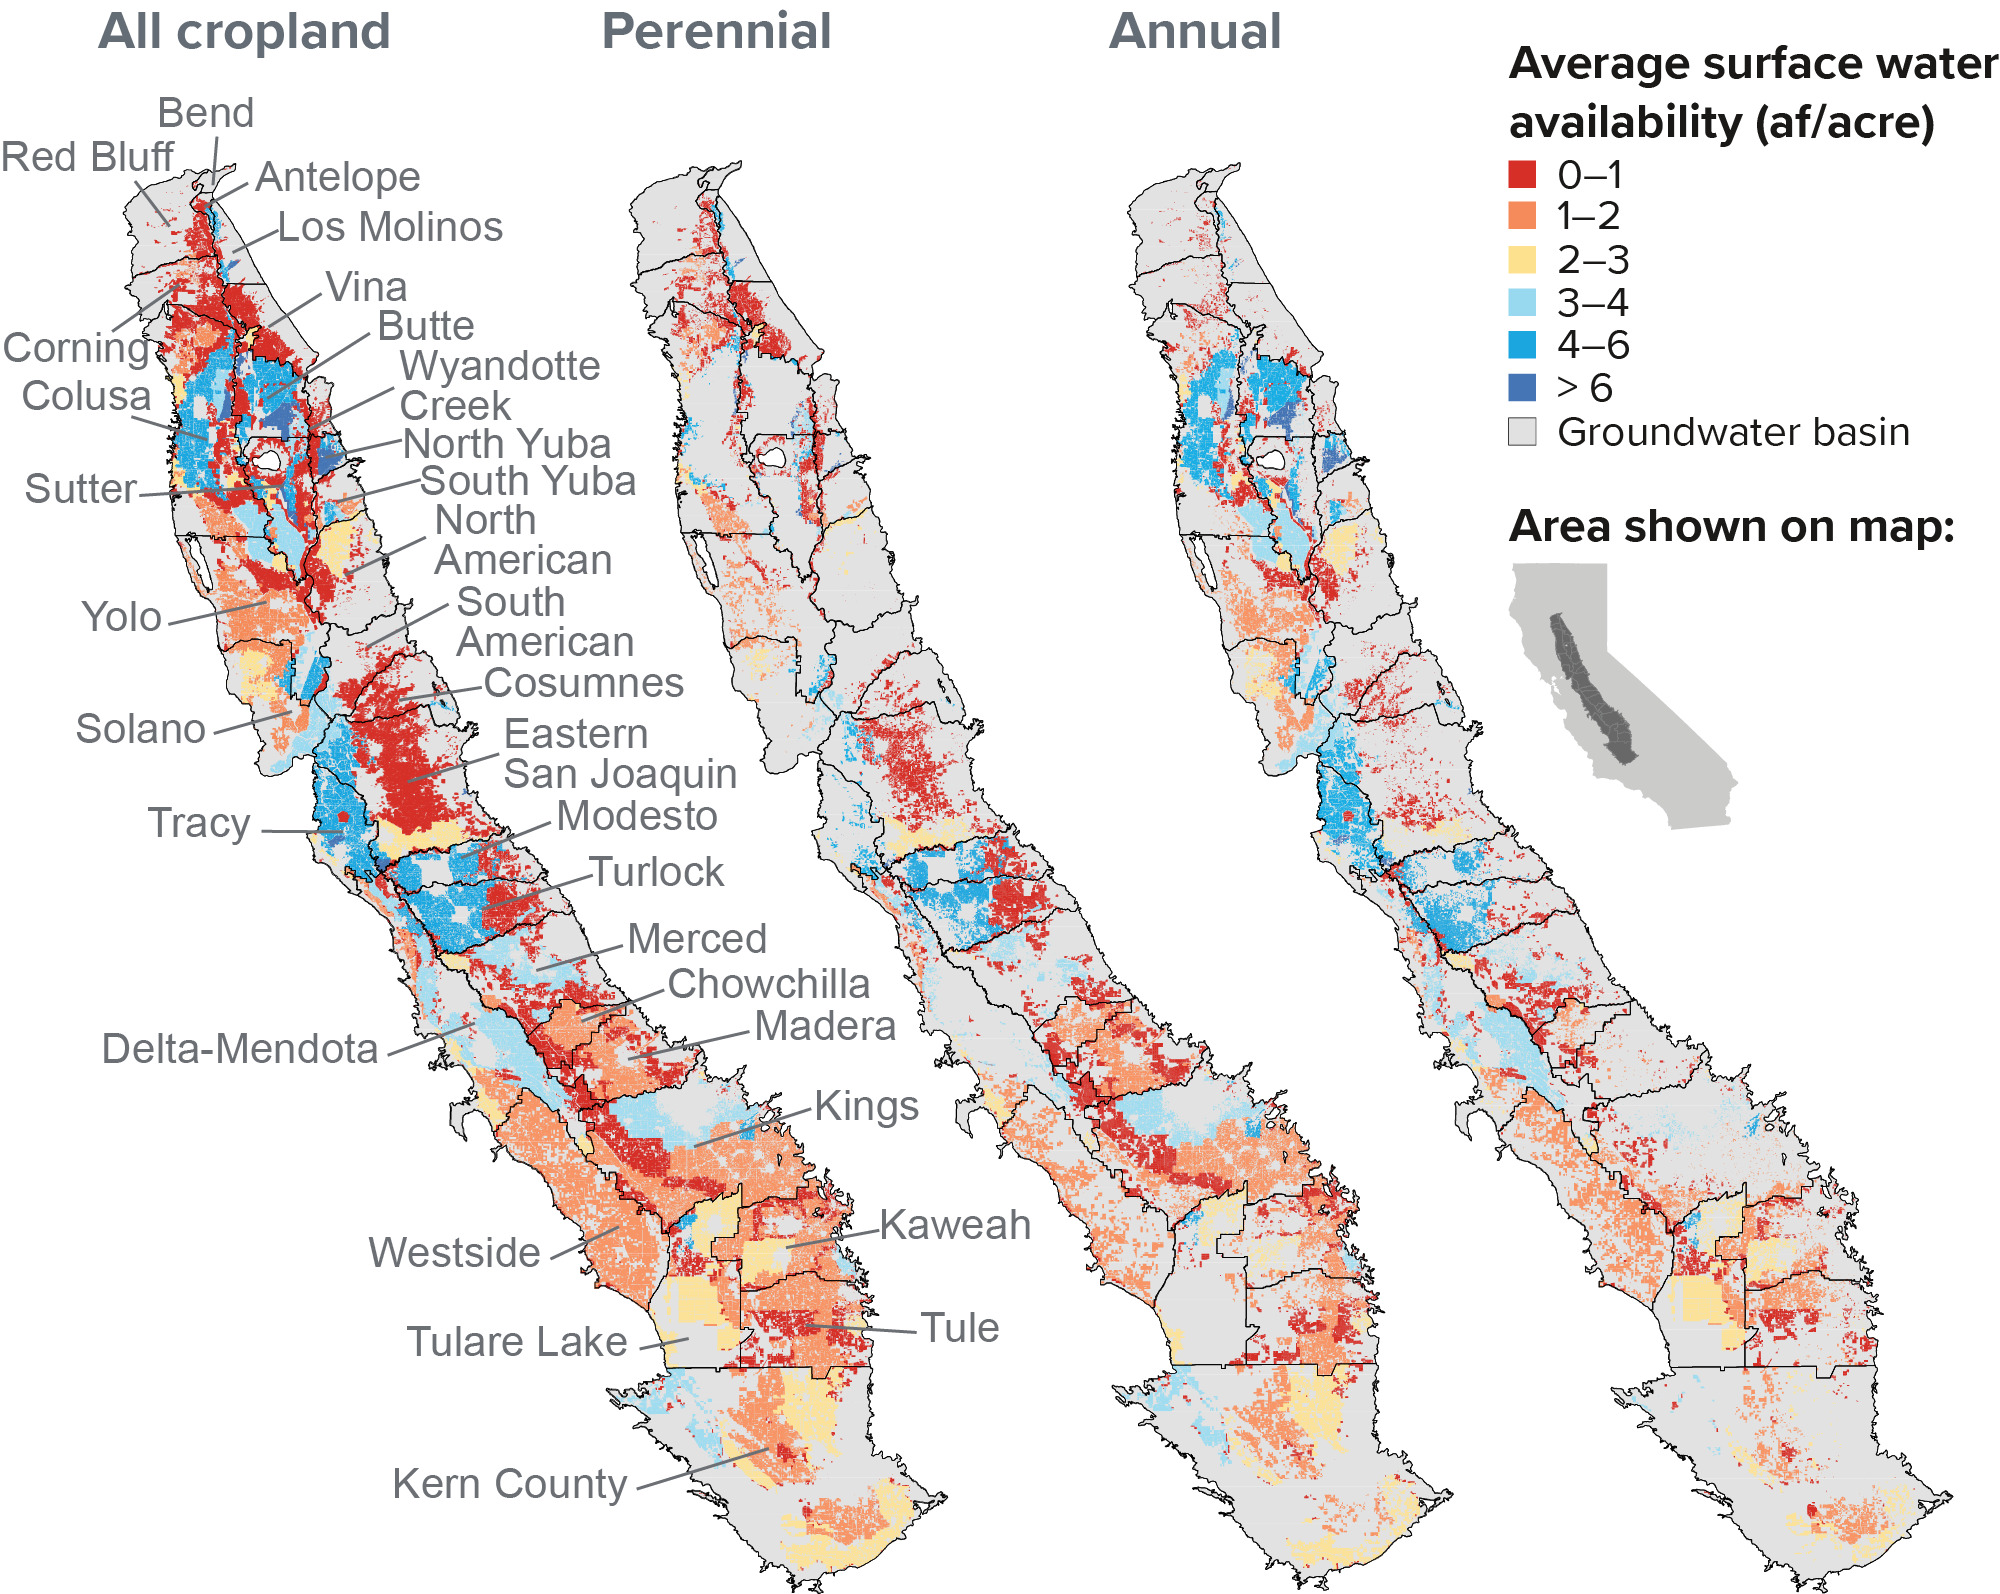 figure - Surface water for farming varies within and across Central Valley groundwater basins, and perennial crops rely more heavily on groundwater